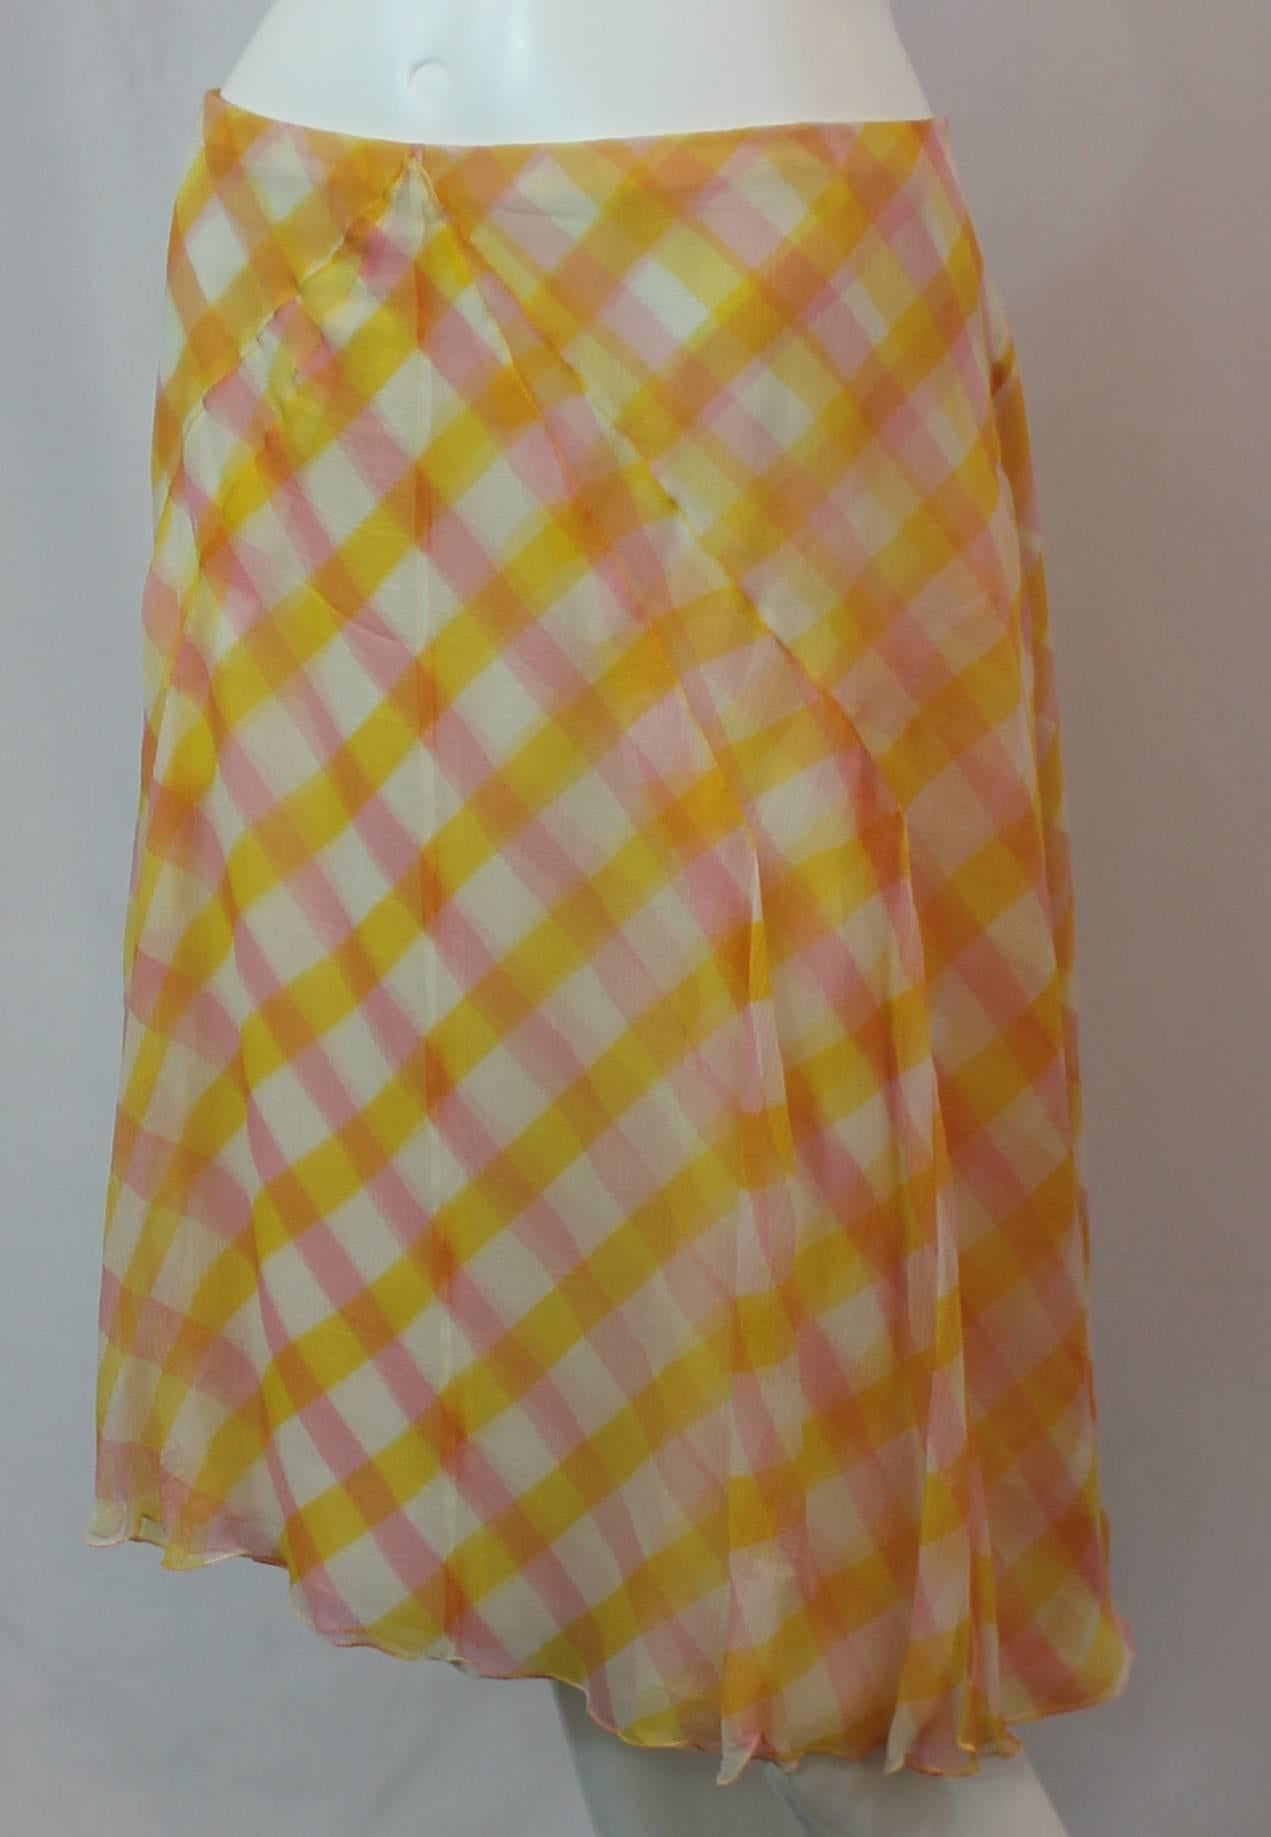 Chanel Yellow, Pink, and White Printed Silk Chiffon Flowing Skirt - 42 - 99C. This skirt has a criss-cross print and has diagonal stitching in the front. There is a back zipper and a white chiffon lining. This skirt is in excellent